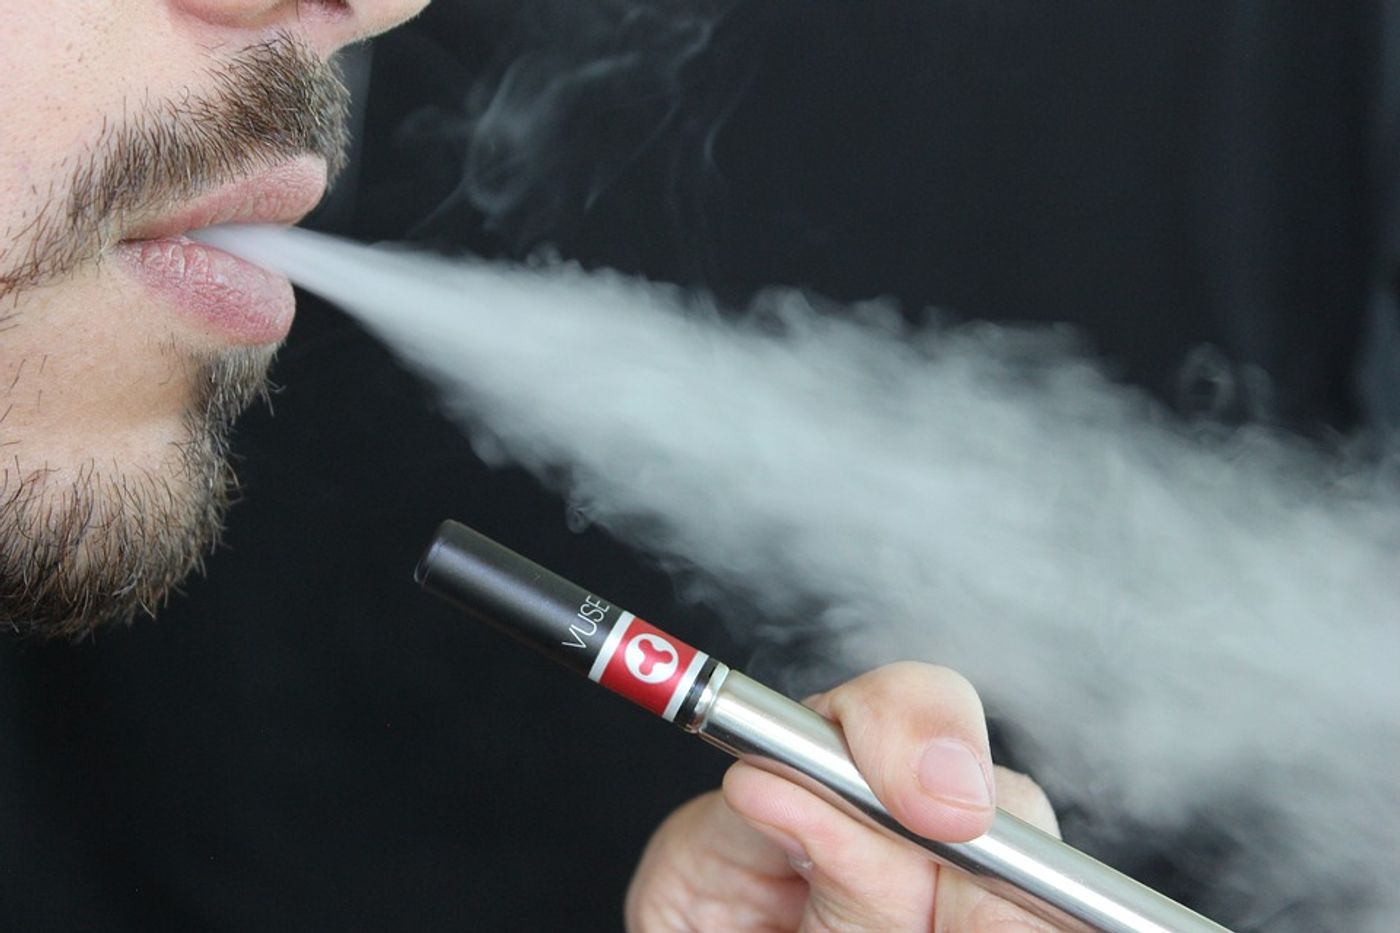 Between 2010 and 2013, the use of e-cigarettes more than doubled among American adults, according to a study from the CDC and Georgia State University. More than 20 million U.S. adults are estimated to have tried them at least once.